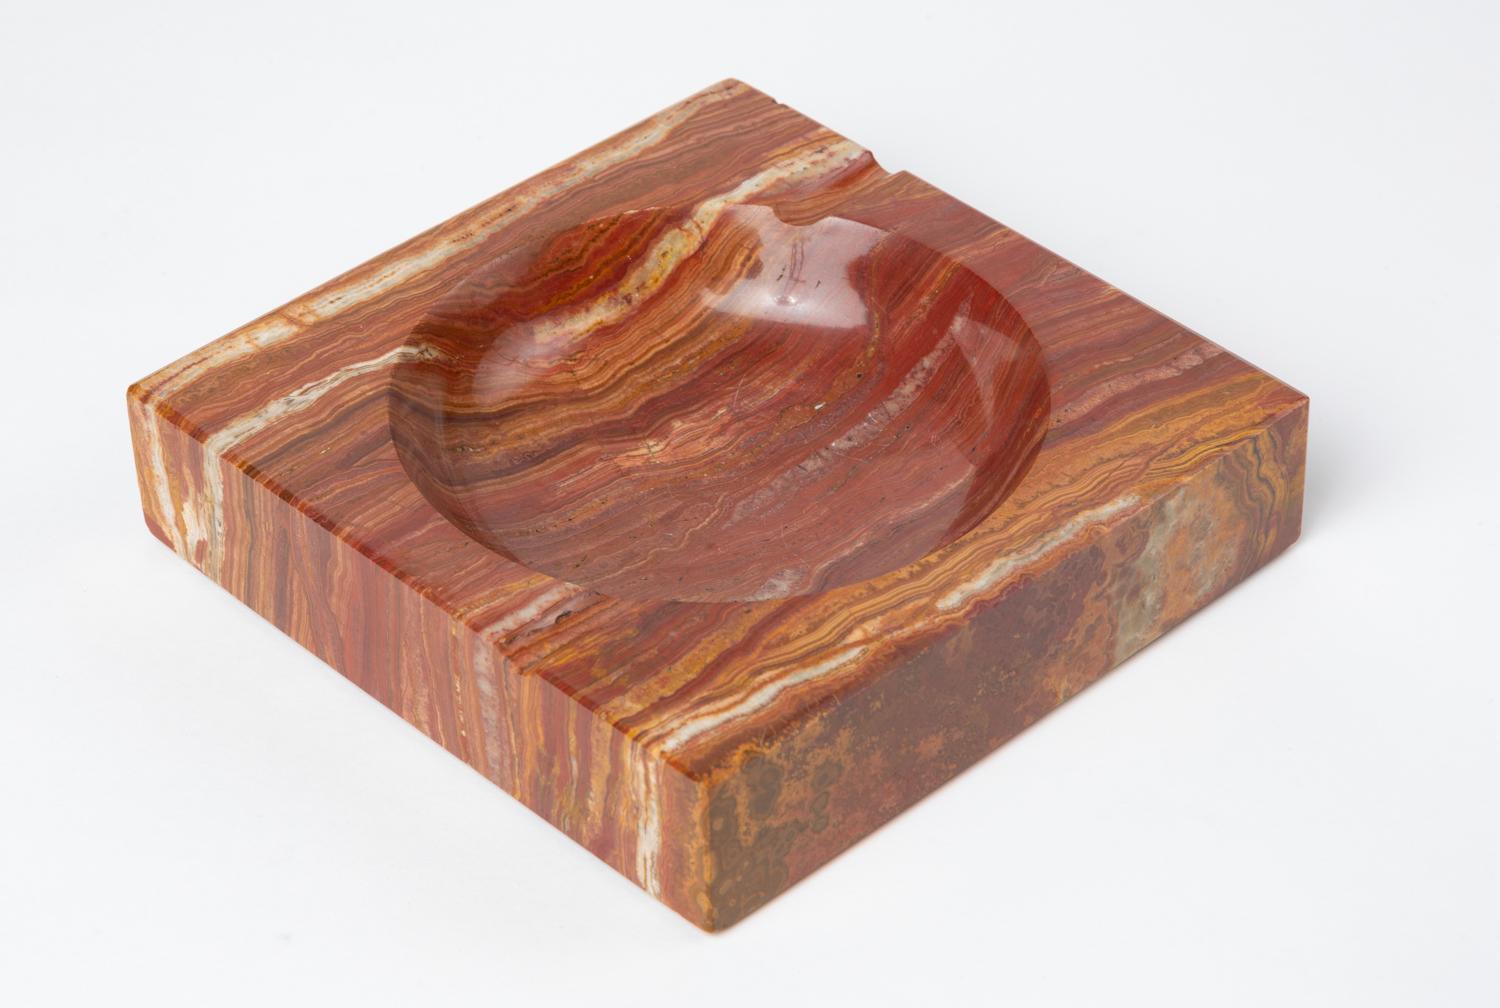 A square ashtray in a polished red marble with gray and white veining. The piece has a circular well, and two routed indentations perpendicular to its edges. The corners and edges of the face are chamfered and the piece has a red felt pad on the